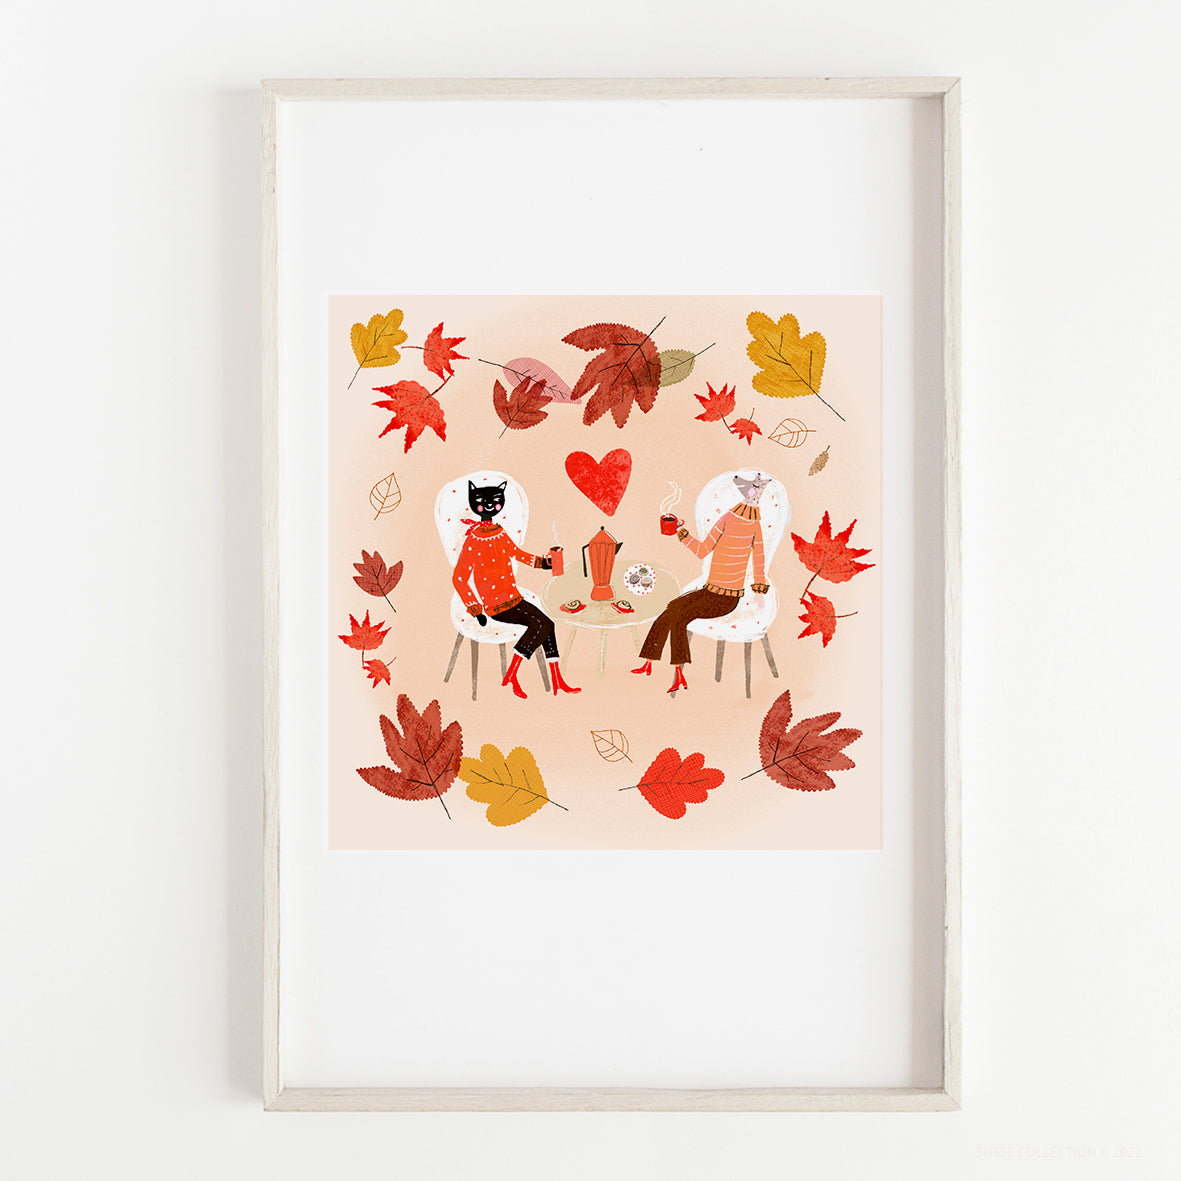 Fika art Print in frame by Susse Linton for Susse Collection